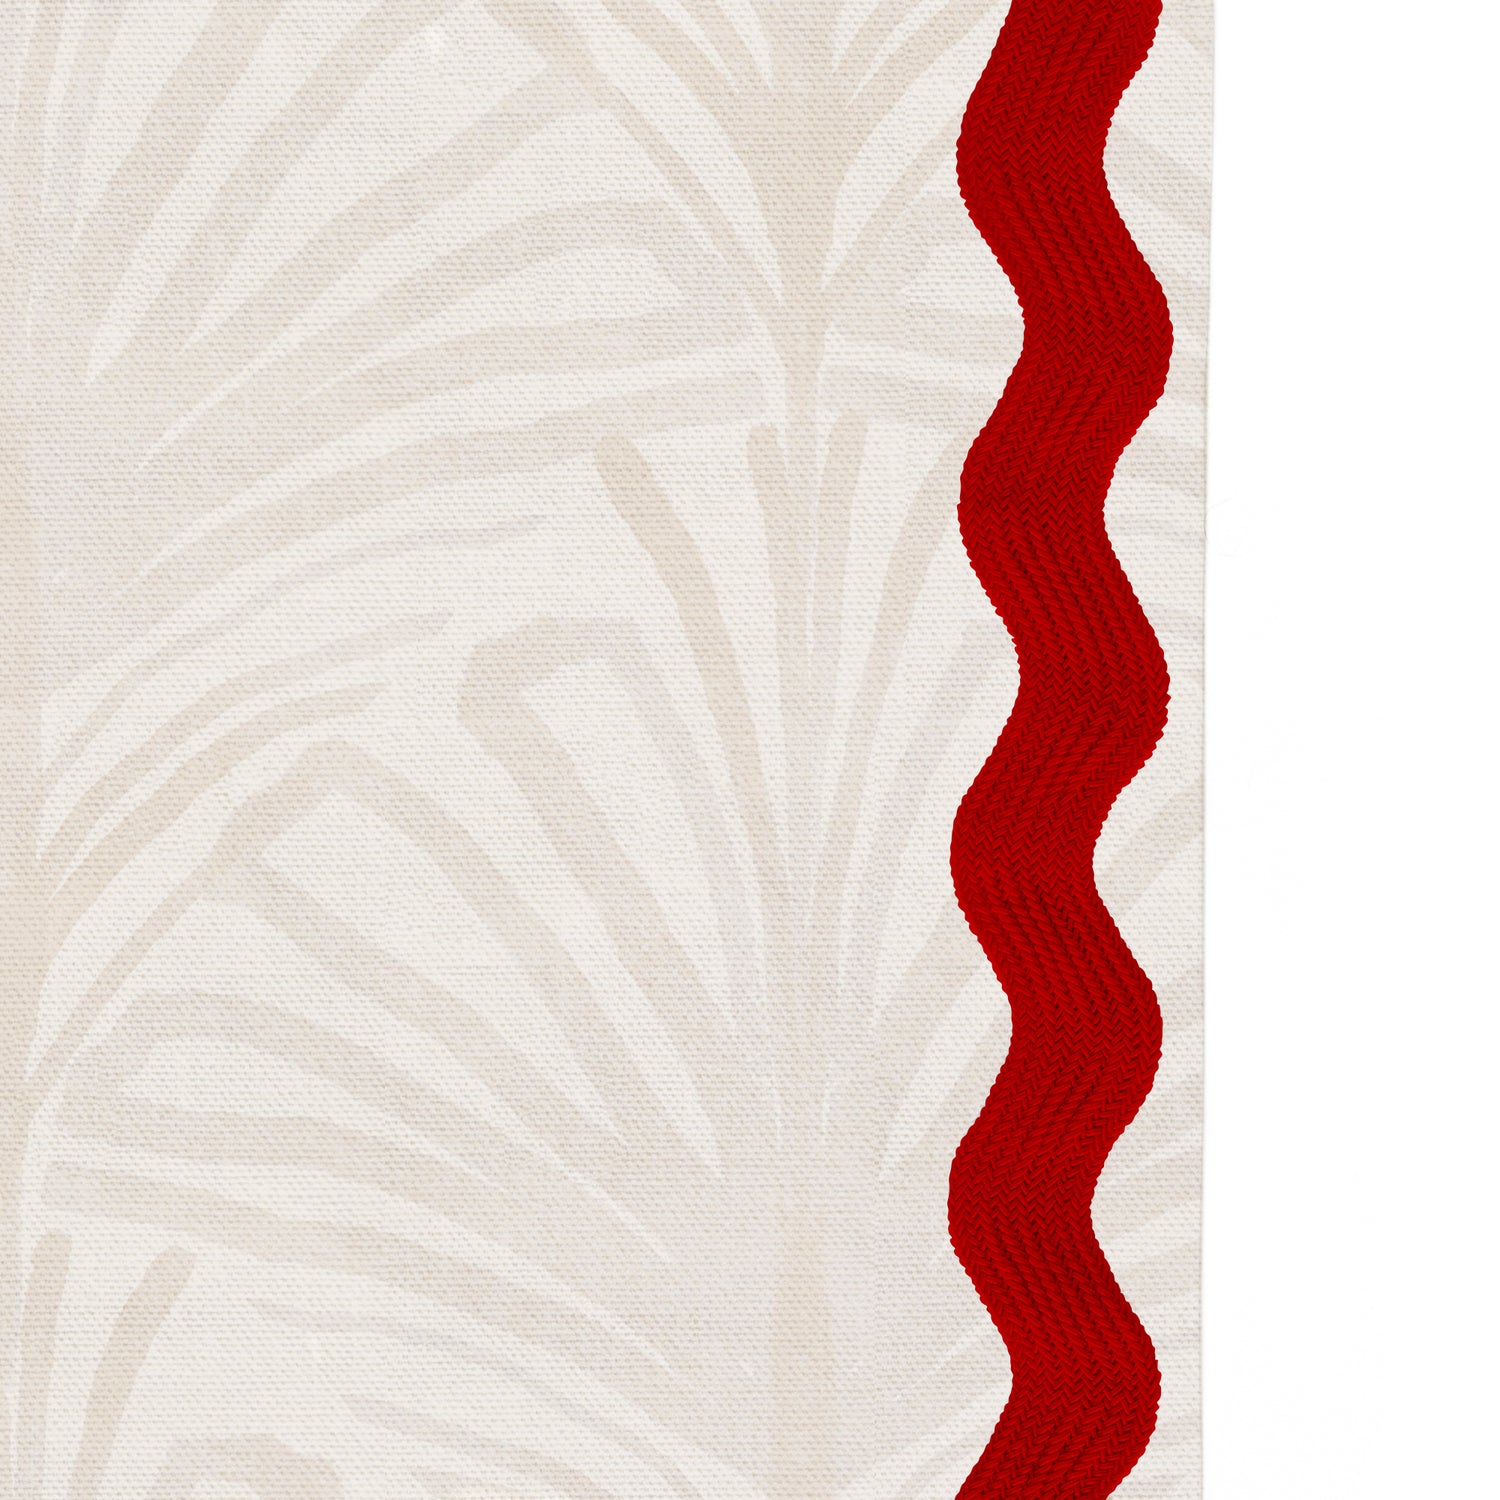 Upclose picture of Suzy Sand custom Beige Palmshower curtain with cherry rick rack trim